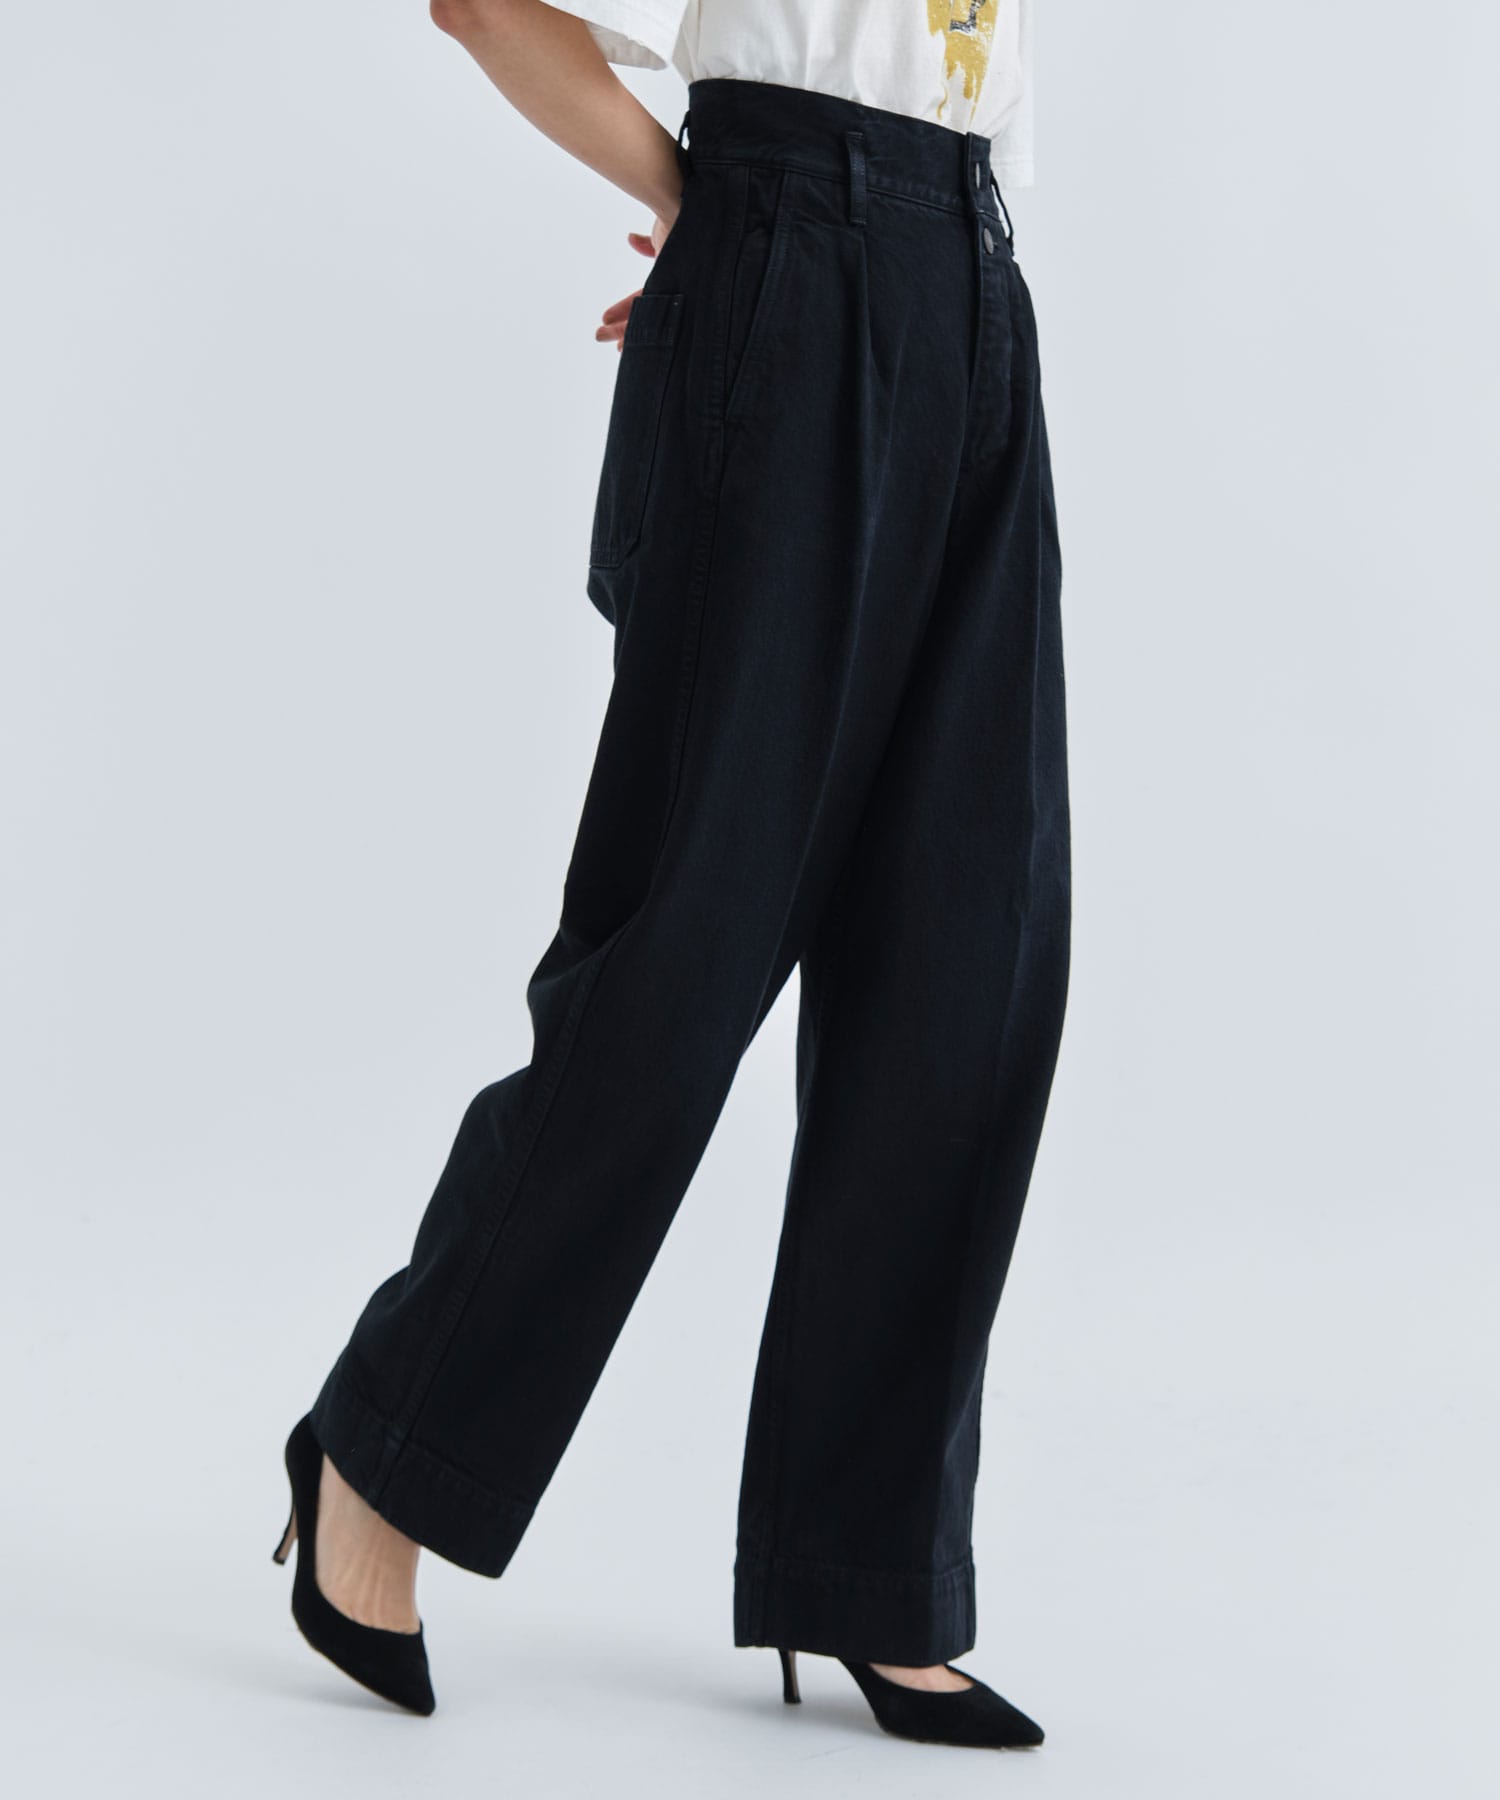 THE WIDE JEAN TROUSERS TANAKA